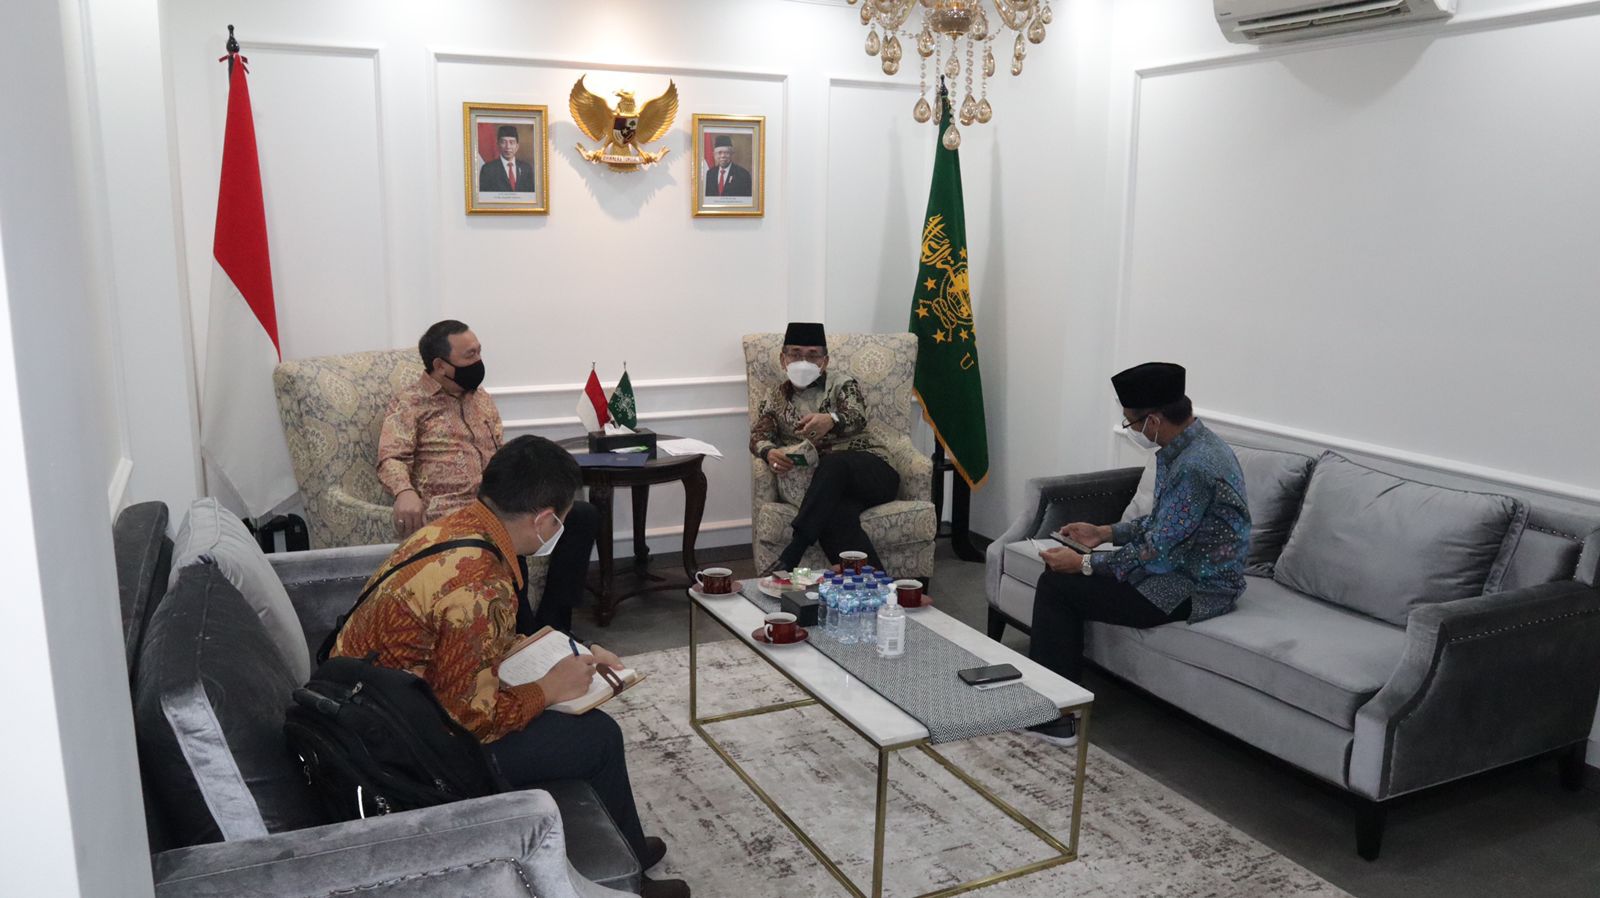 Indonesia’s participation in the VII LWTR Congress discussed in Jakarta